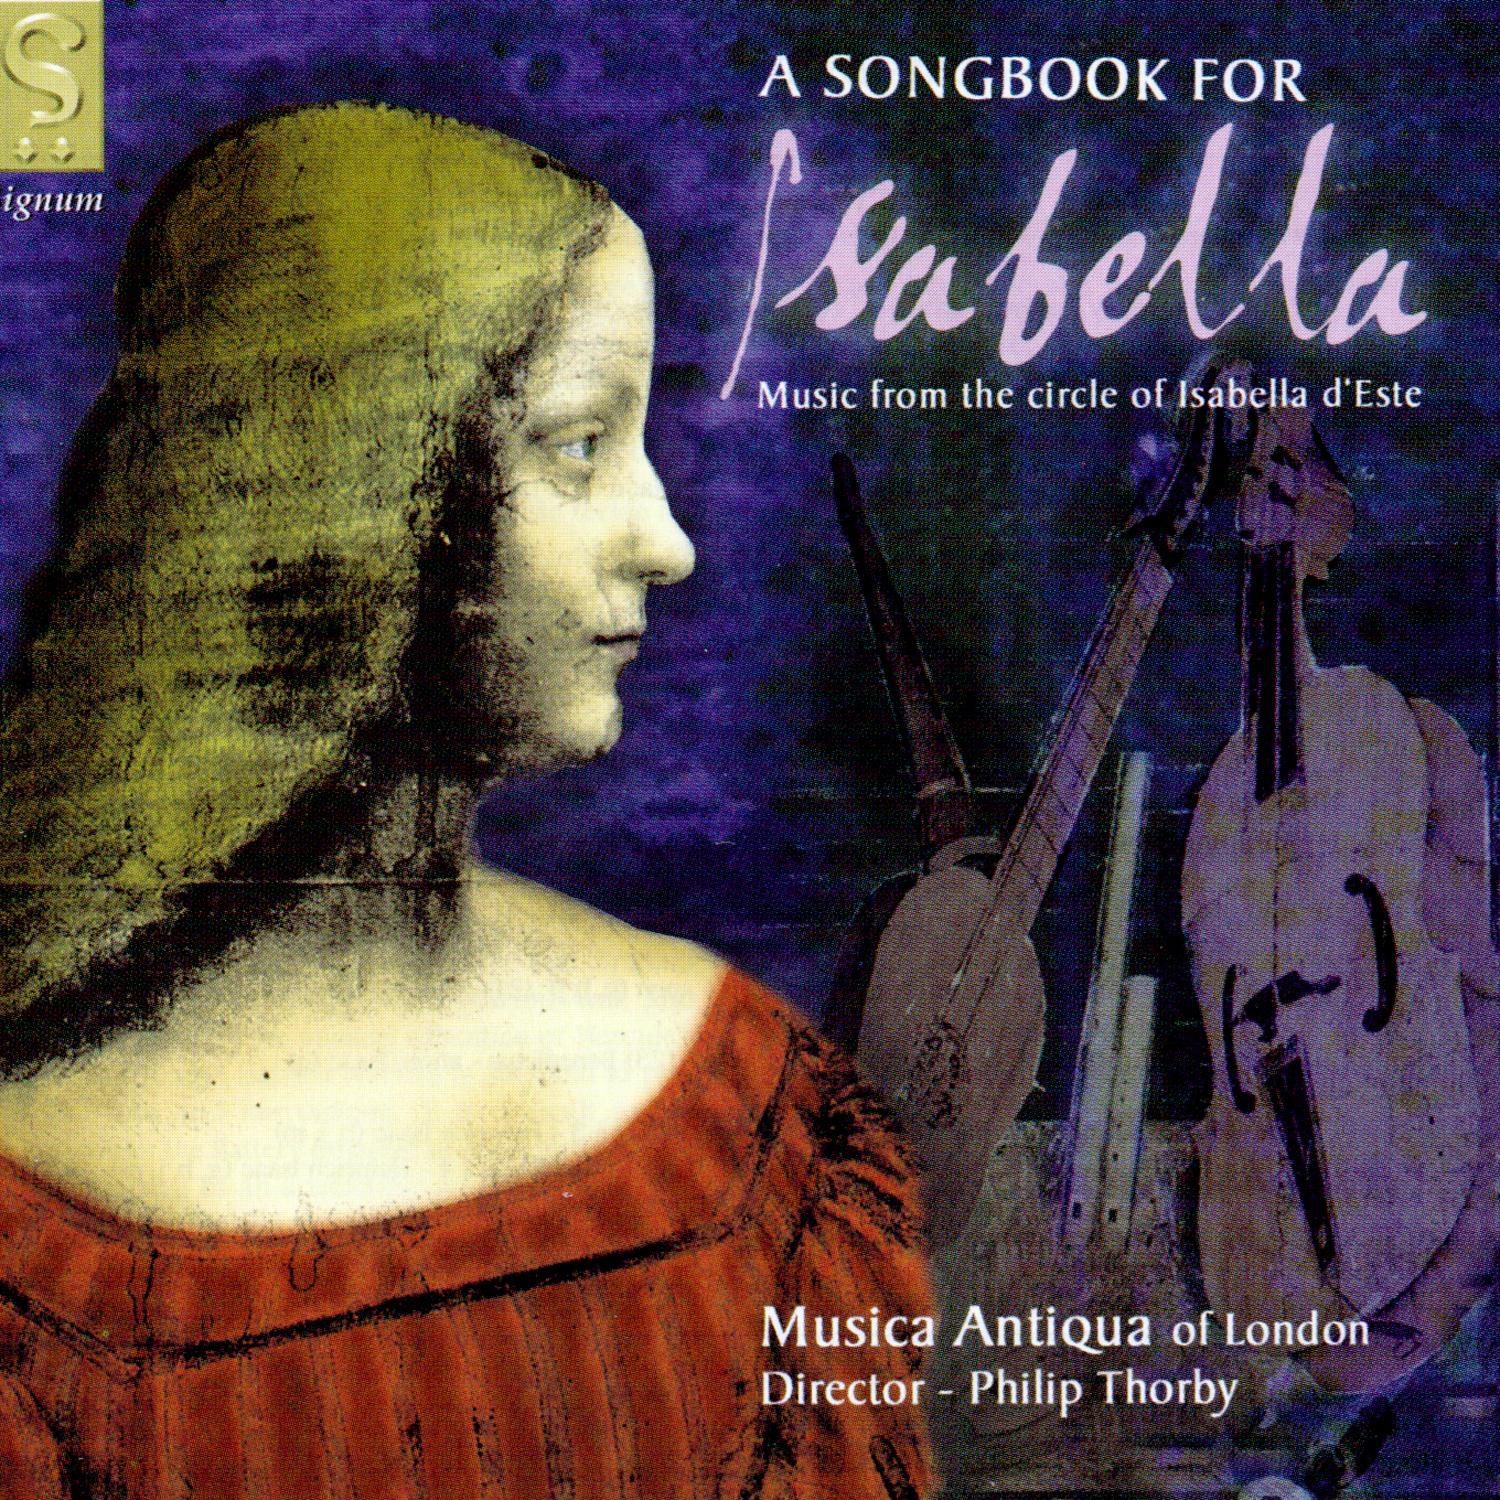 A Songbook for Isabella: Music from the Circle of Isabella d'Este